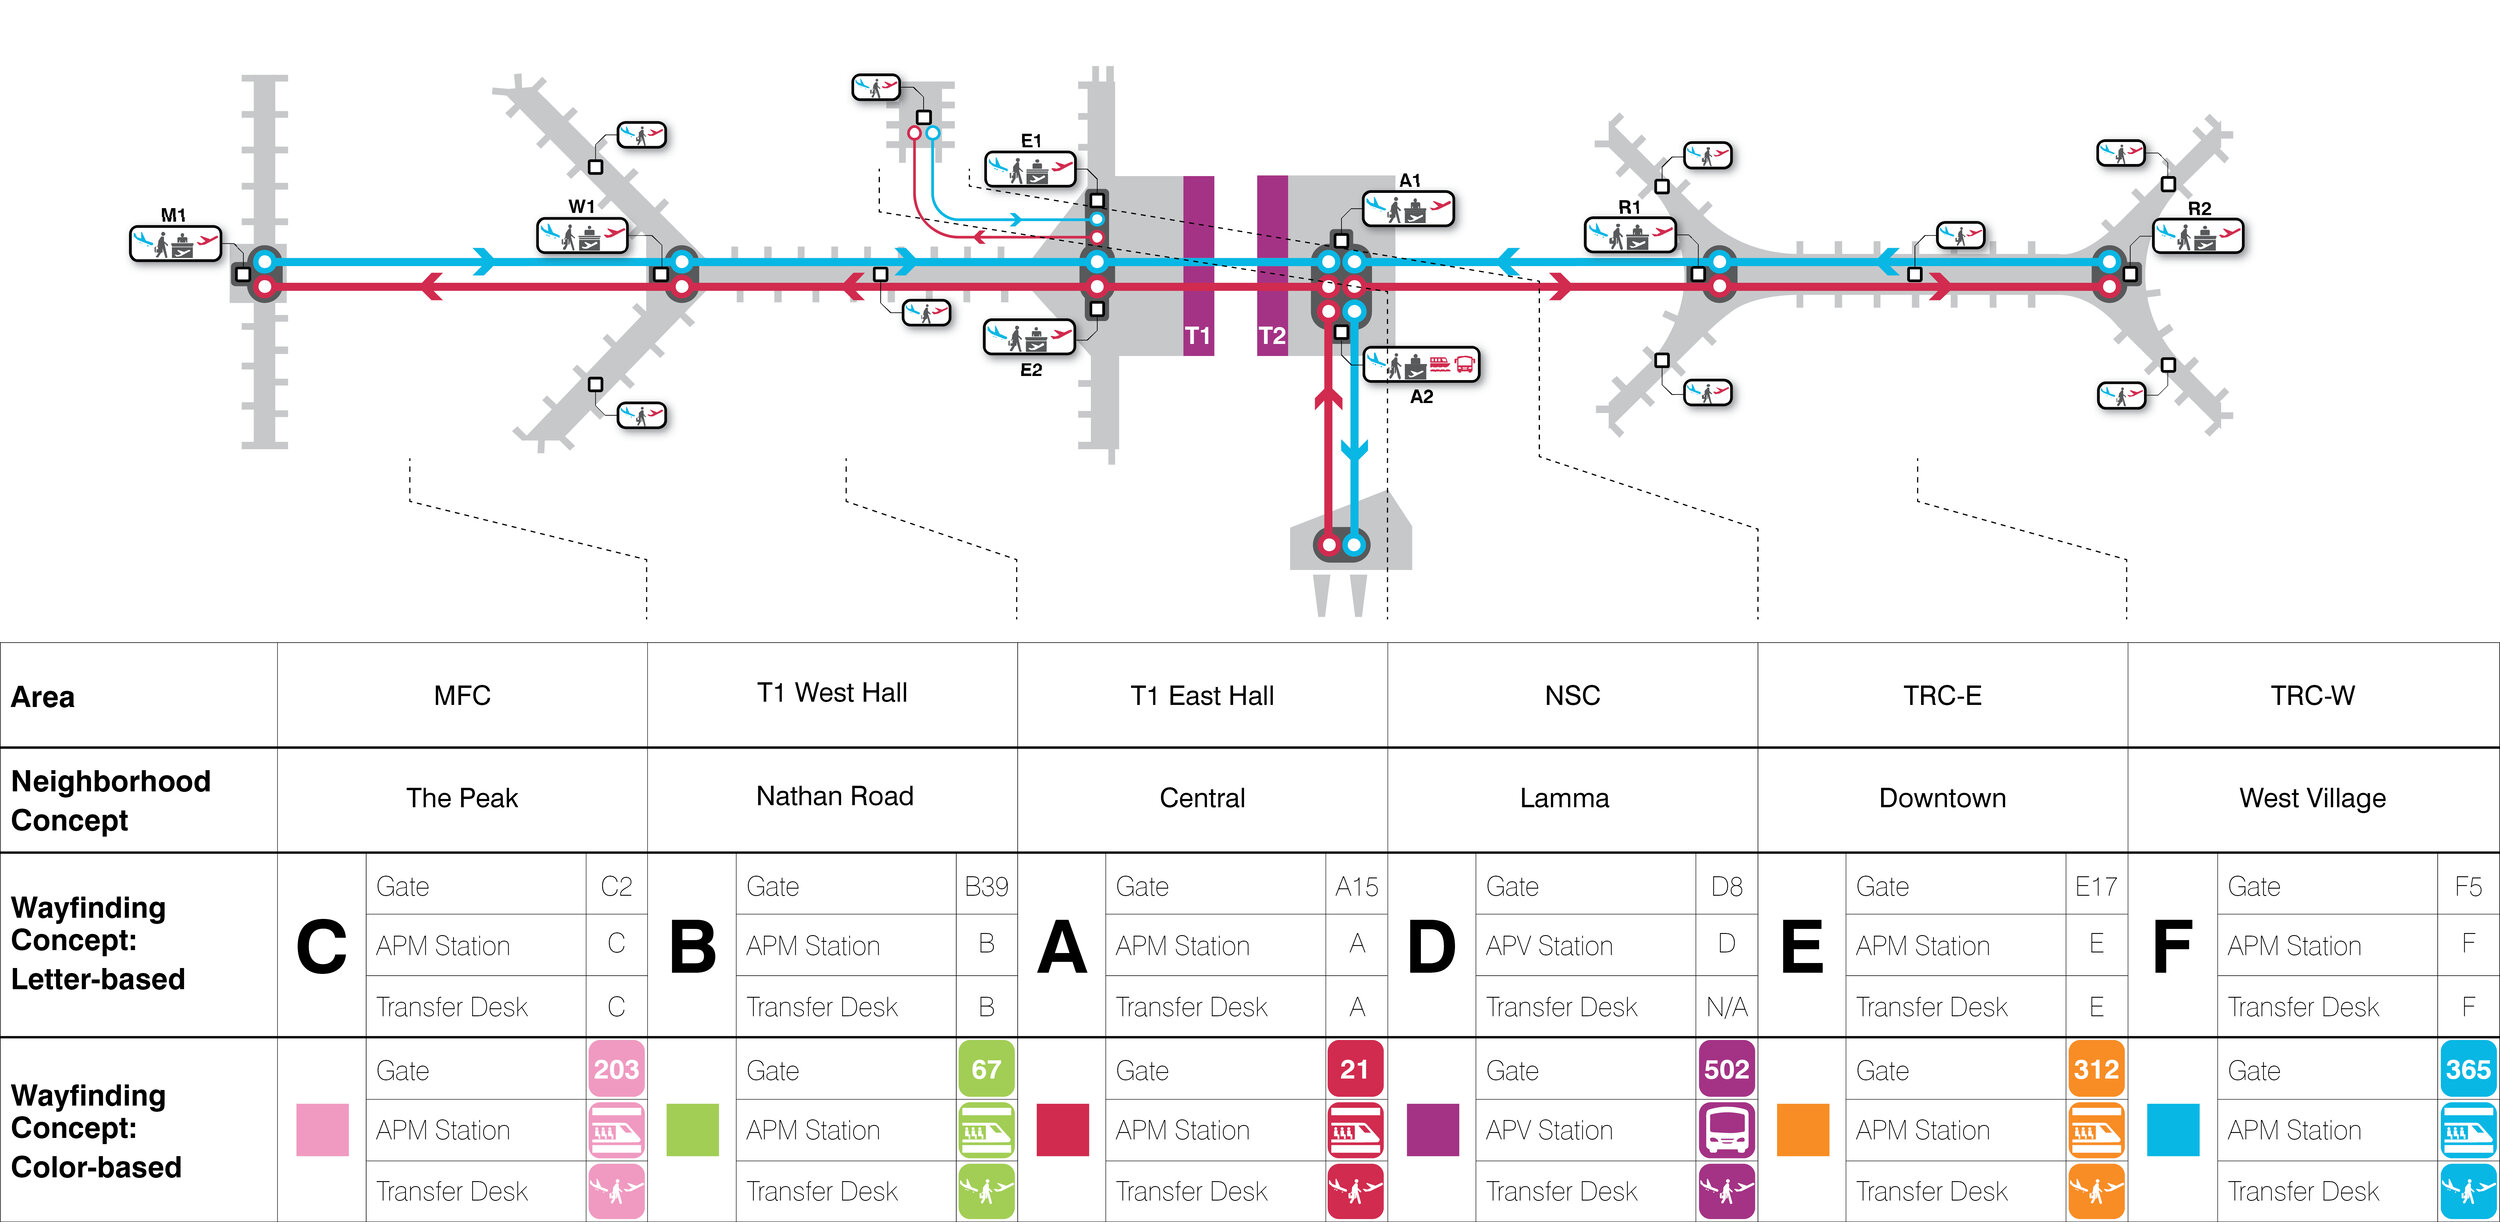 Diagram of the interconnection of the Terminal 2 Concourse with other HKIA passenger facilities